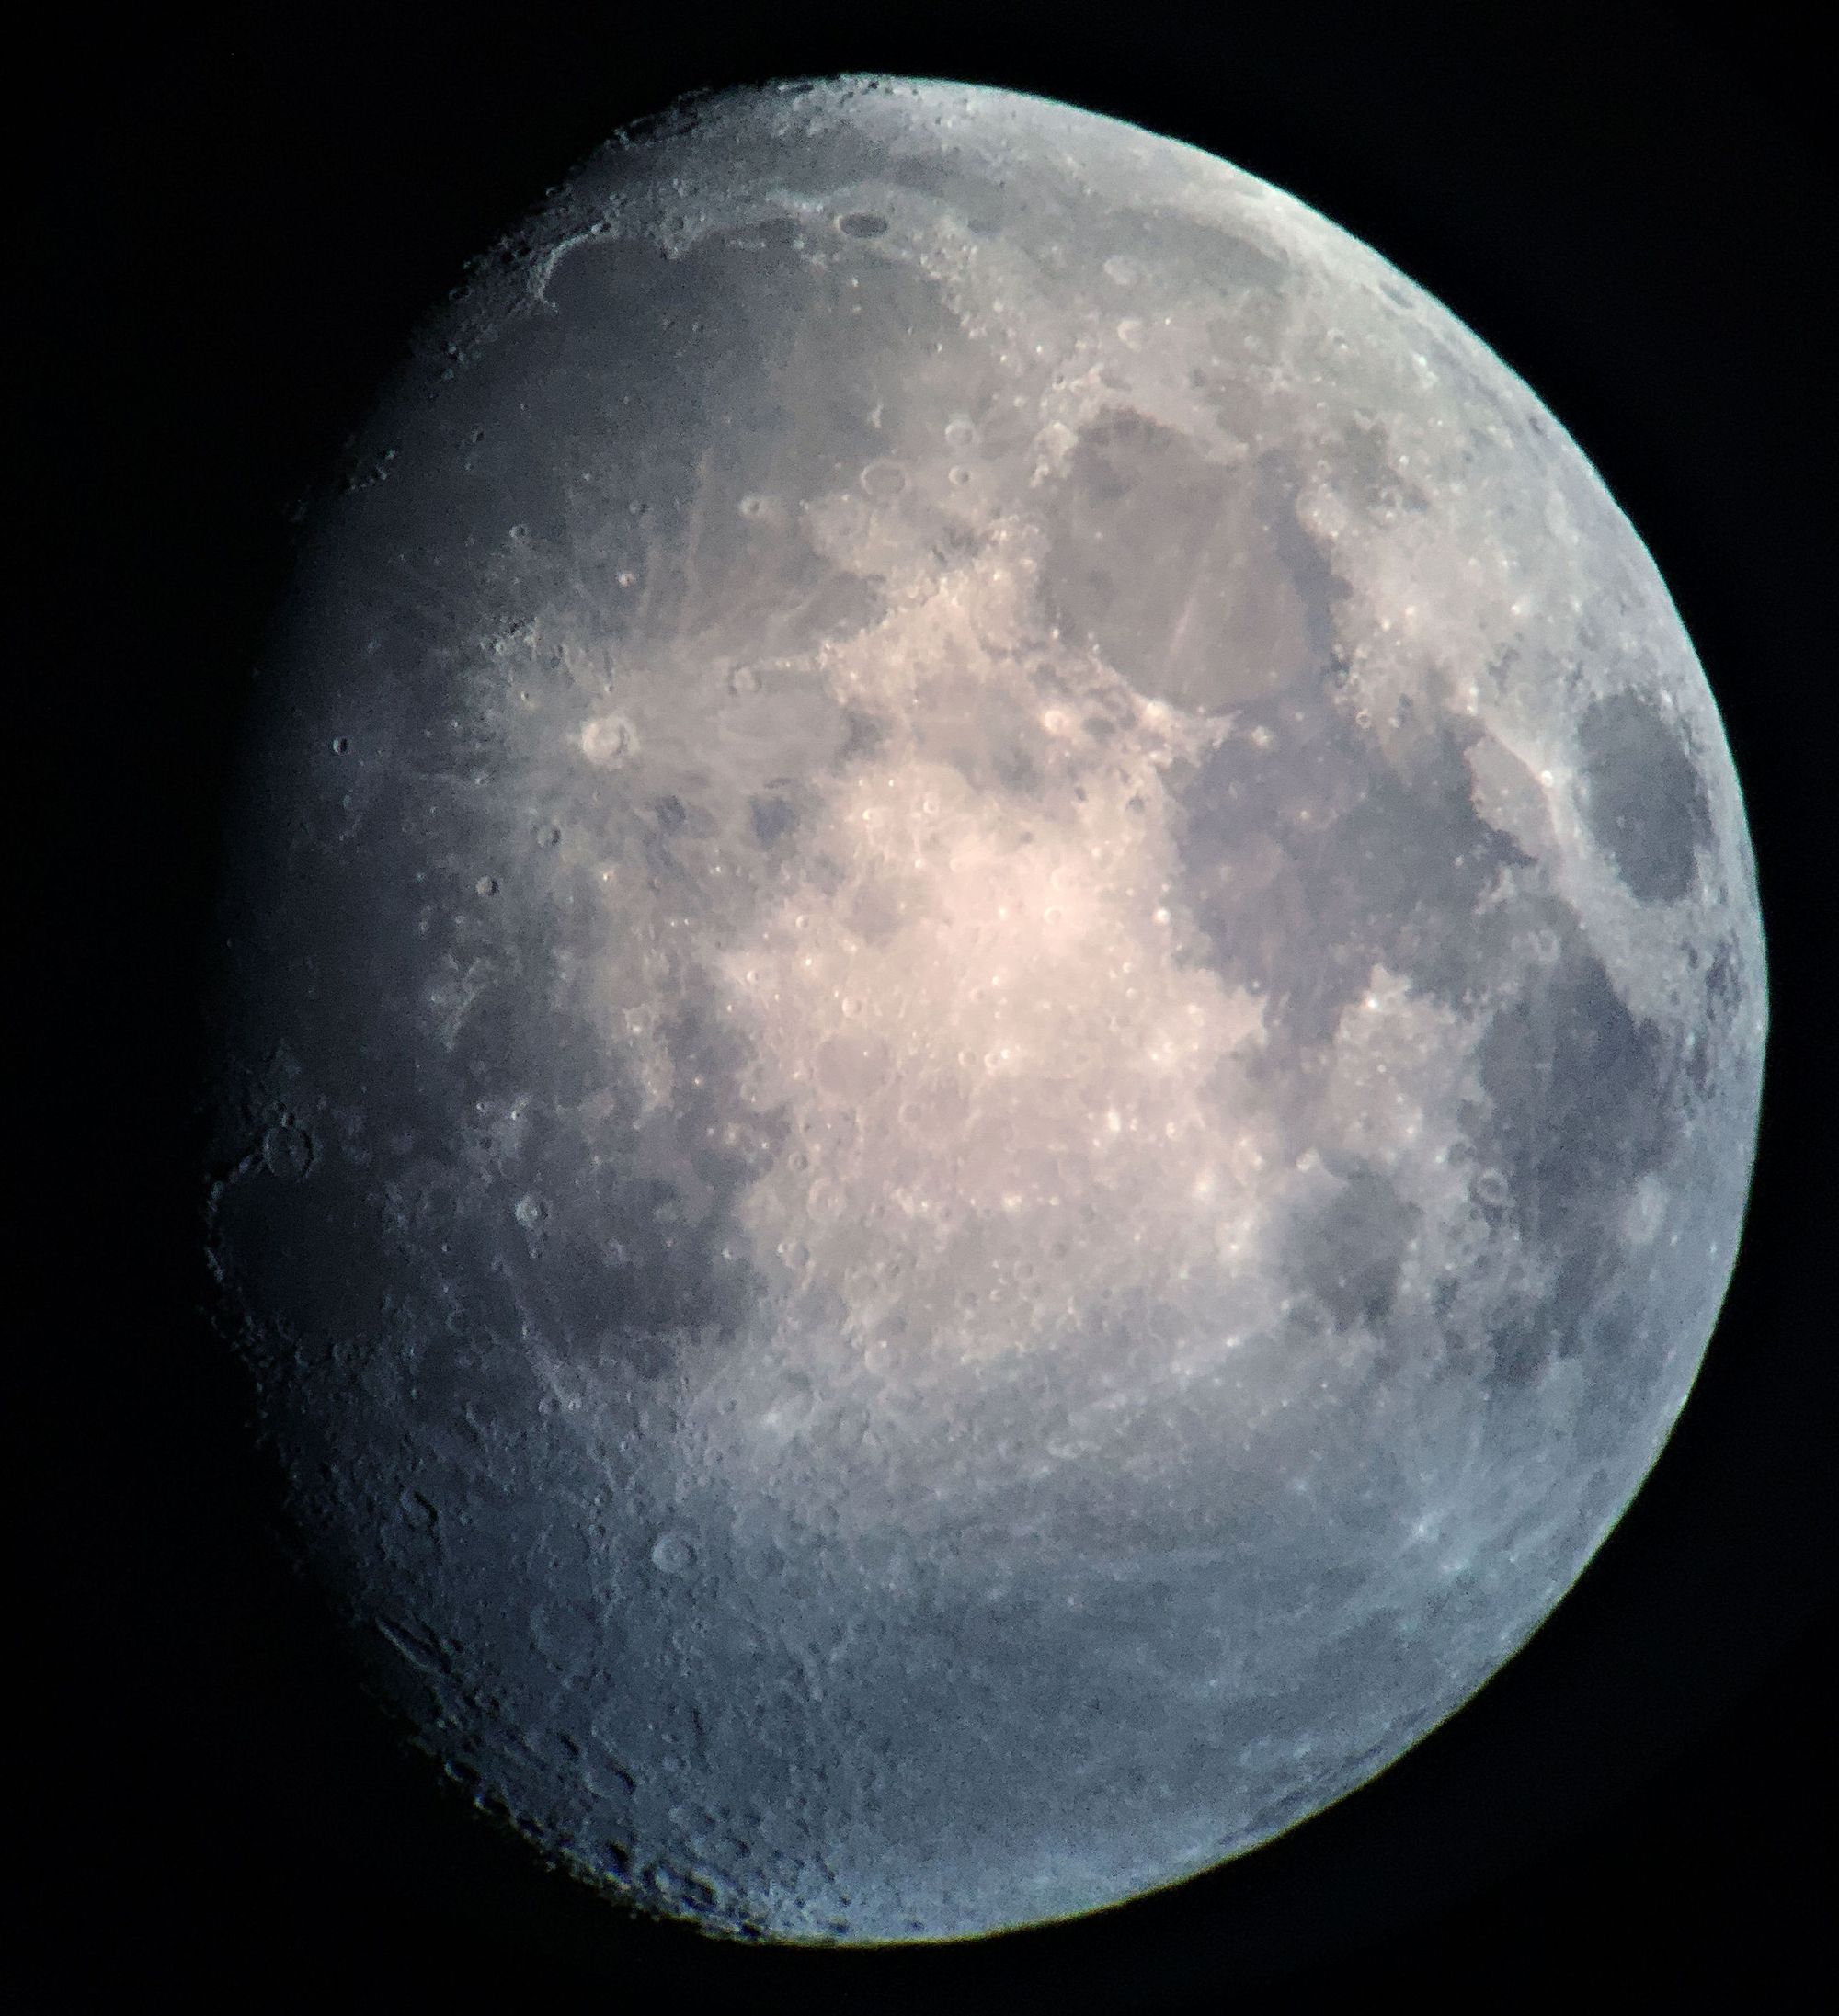 Moon on May 3rd, 2020